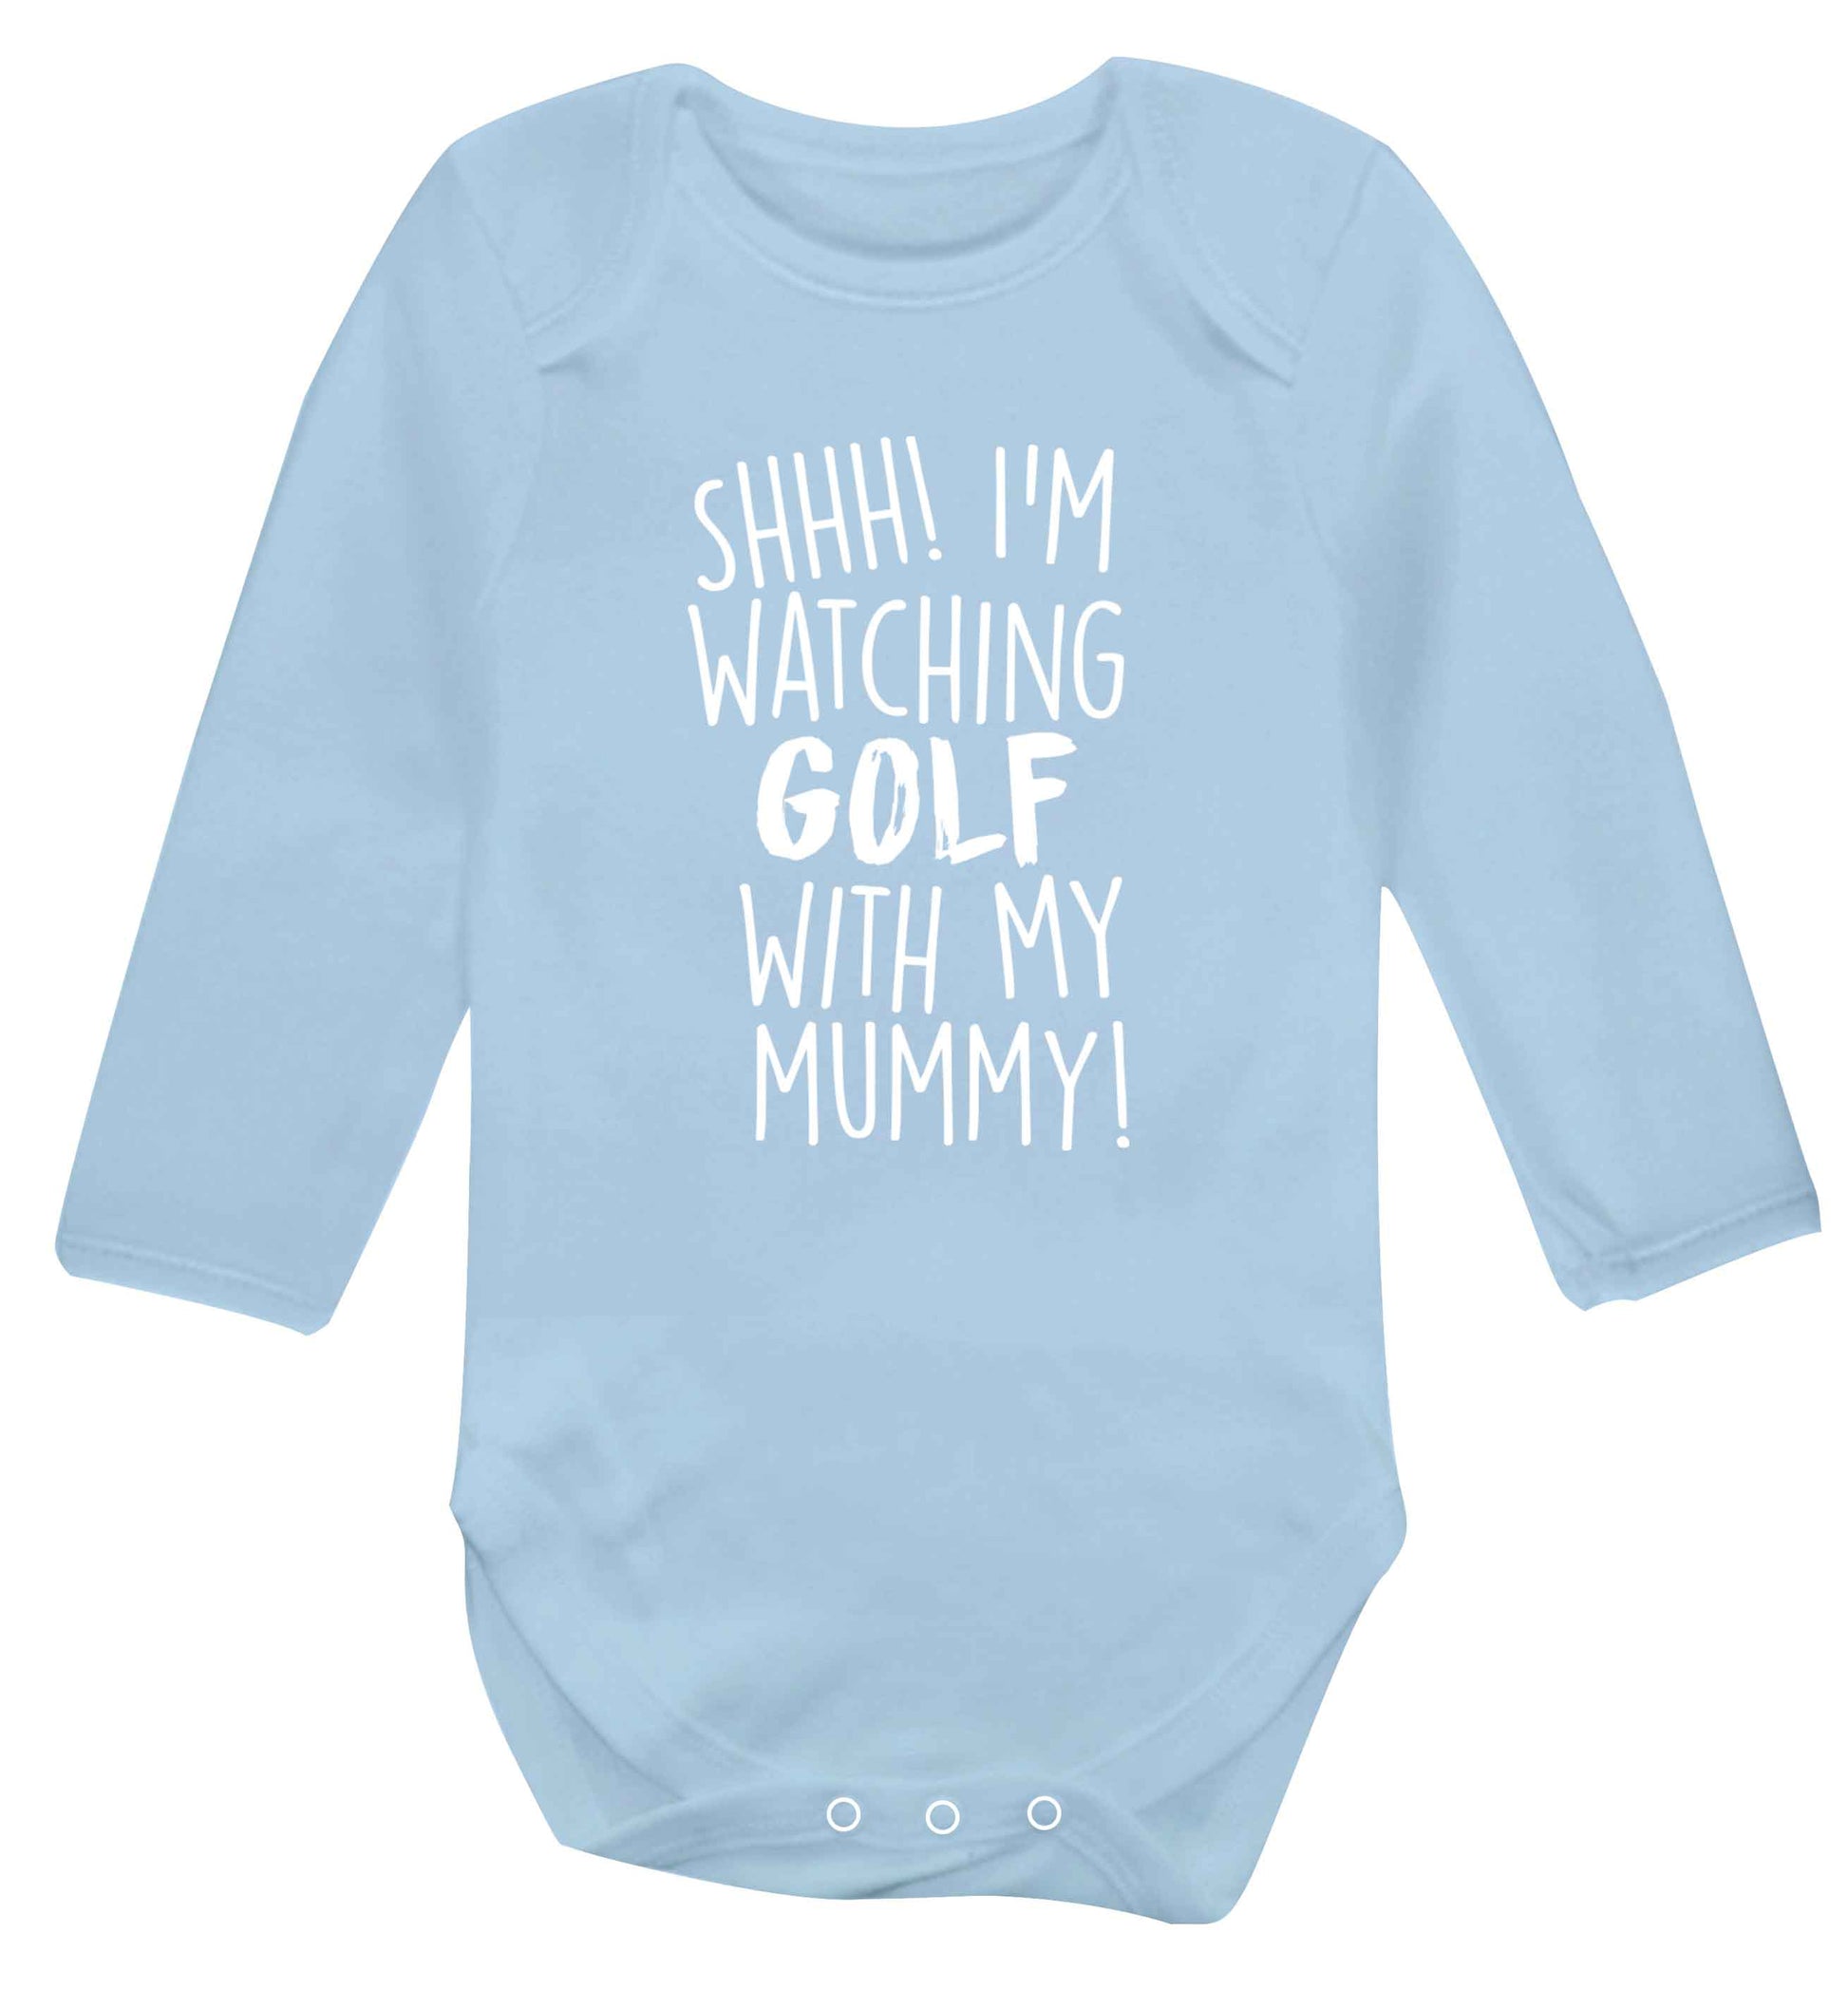 Shh I'm watching golf with my mummy Baby Vest long sleeved pale blue 6-12 months